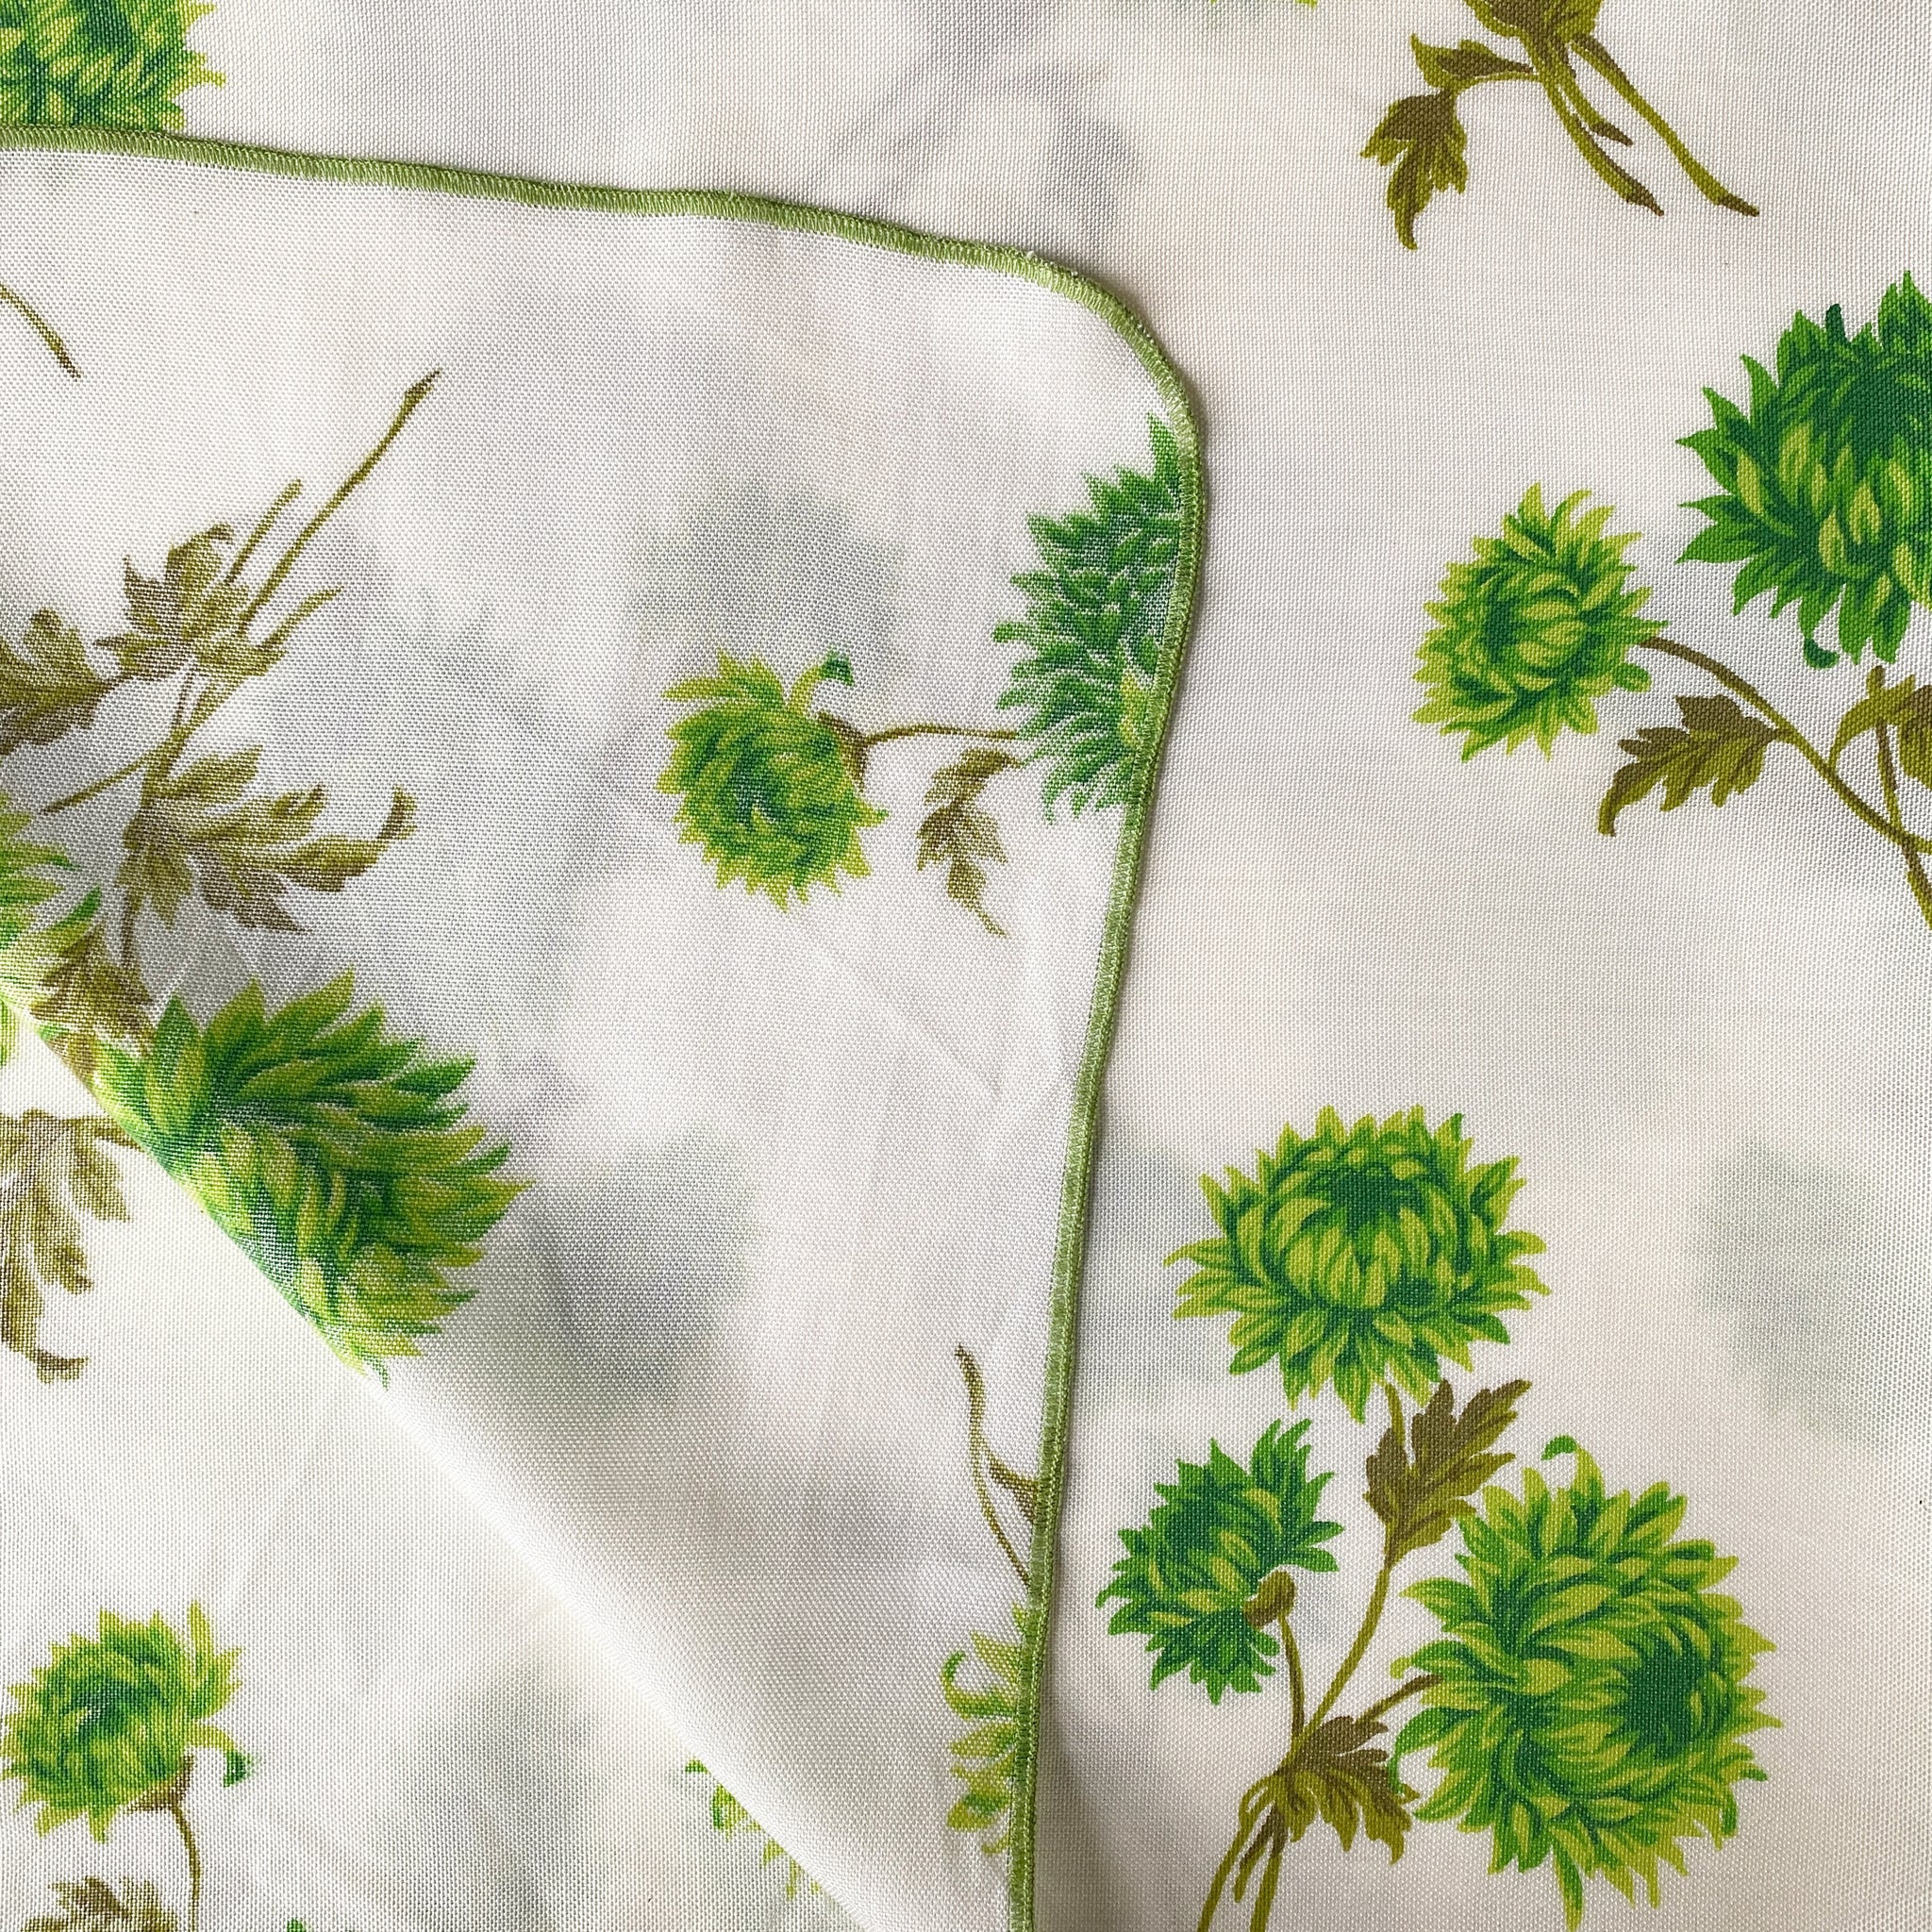 Vintage Green and White Floral Tablecloth with Green Chrysanthemums - 61x80